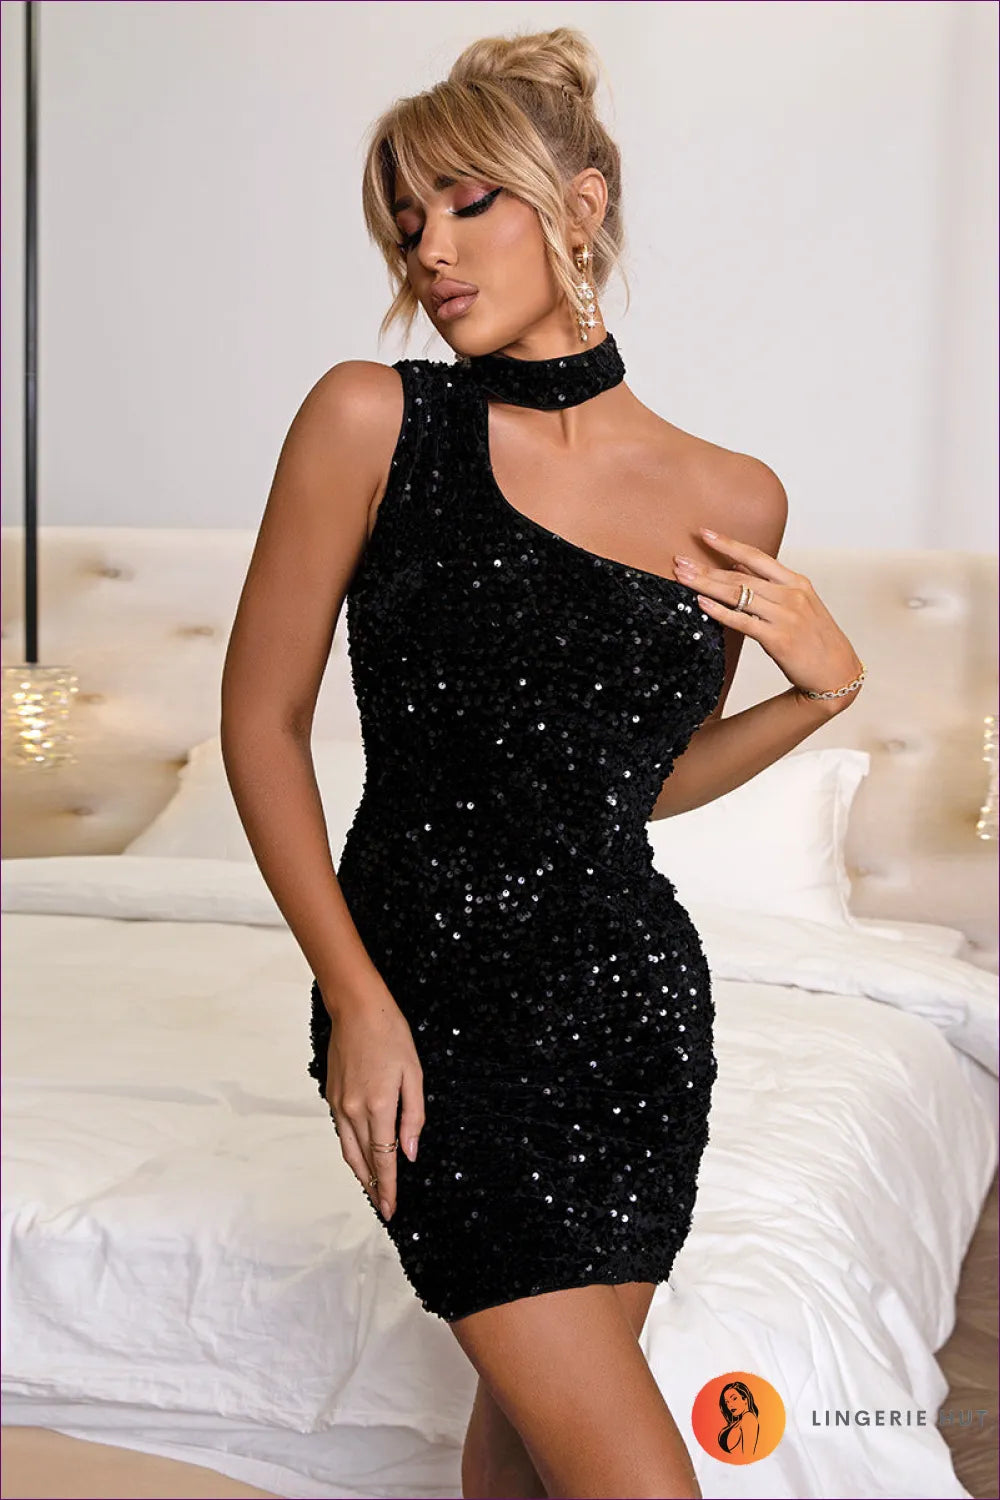 Unleash Your Allure With Asymmetric Sequin Design And Slim Fit! Sparkle This Summer The One-shoulder Elegance